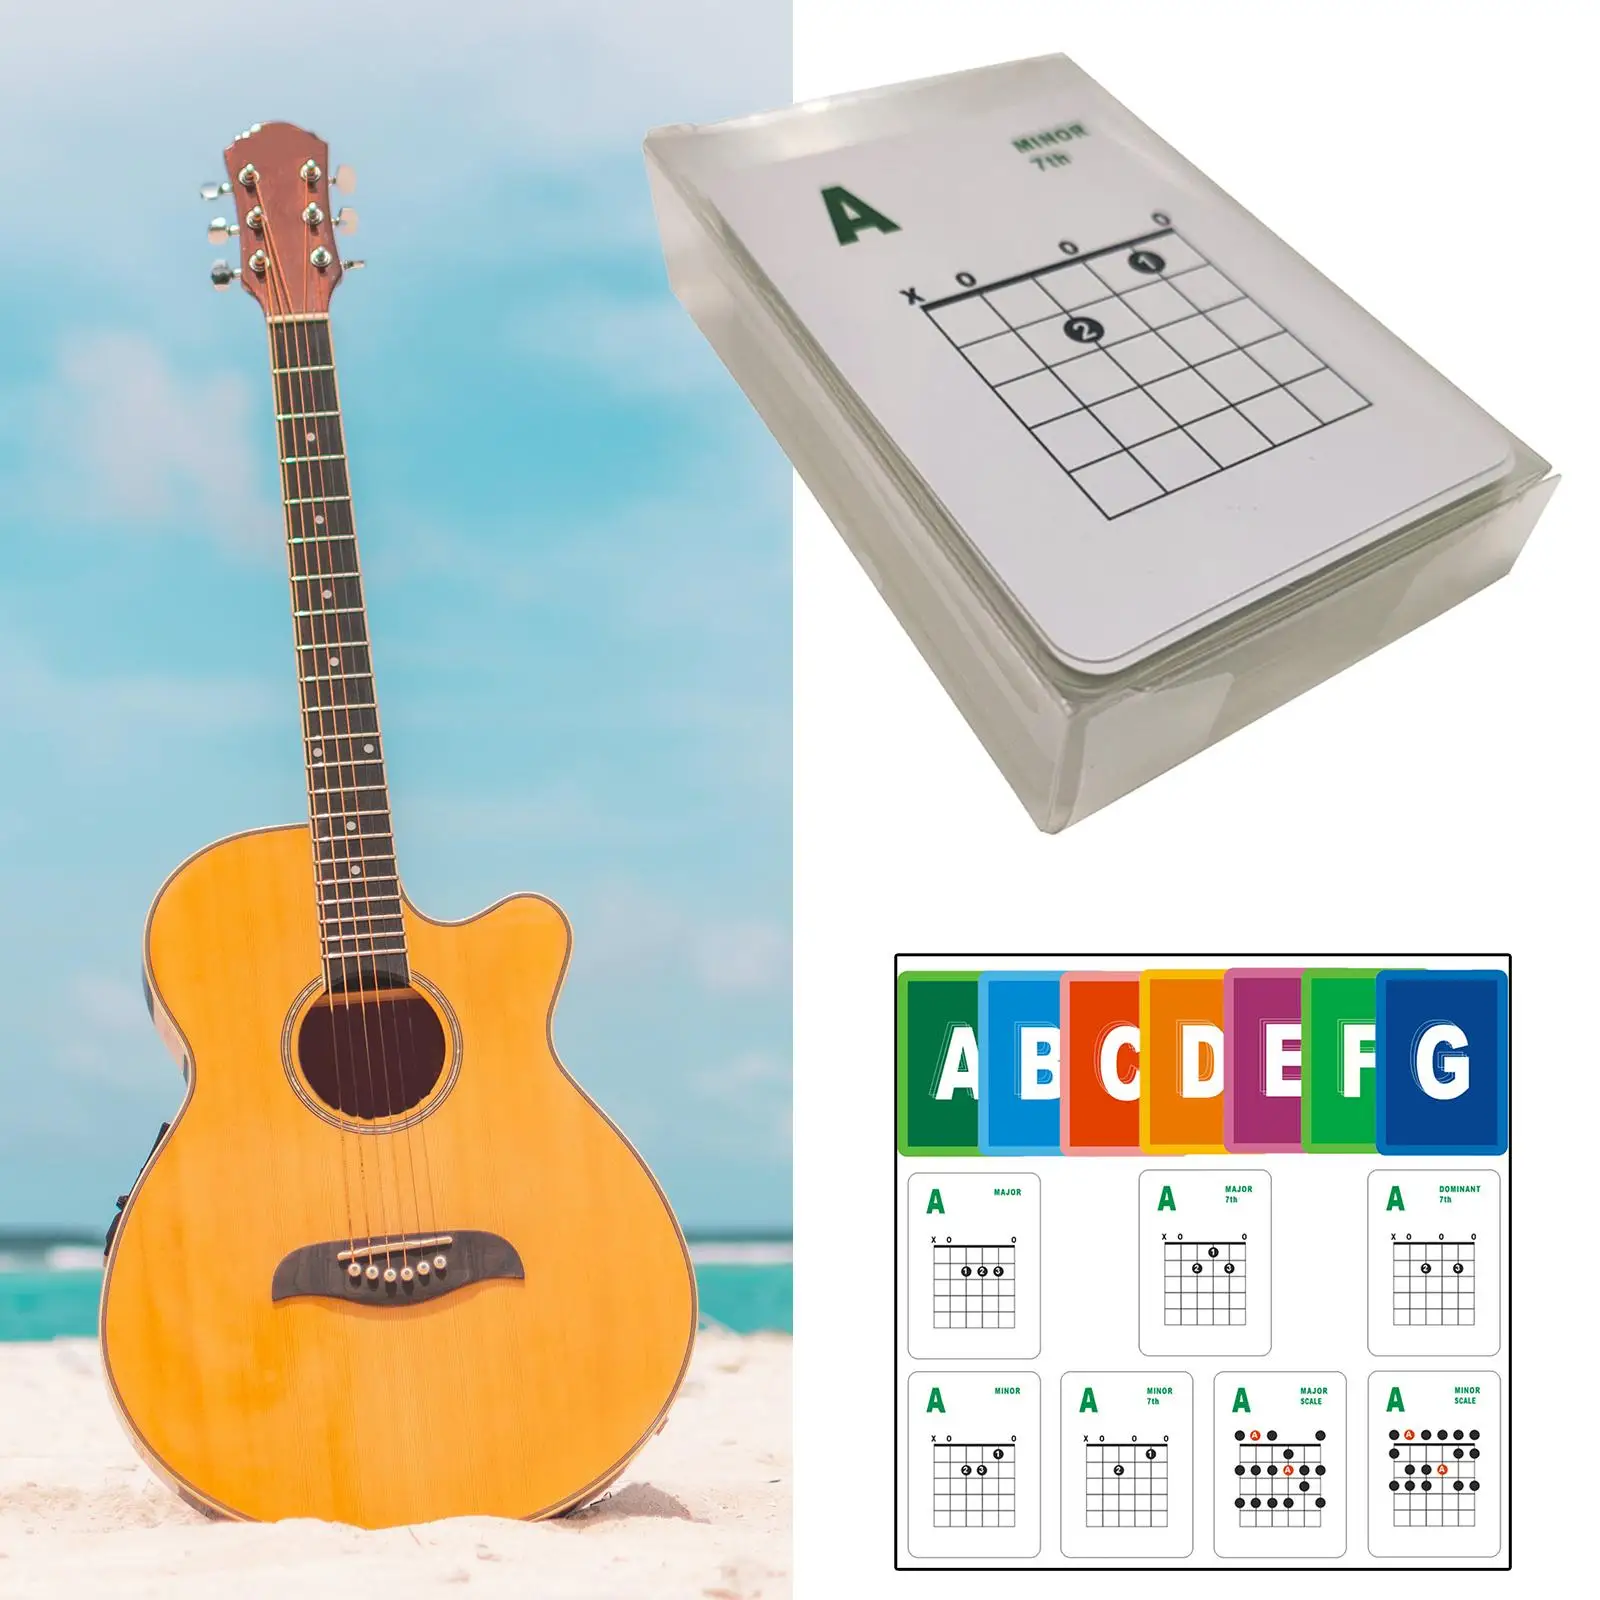 49x Guitar Chords Cards A toG Scale Learning Cards for Guitarists Learn Practice